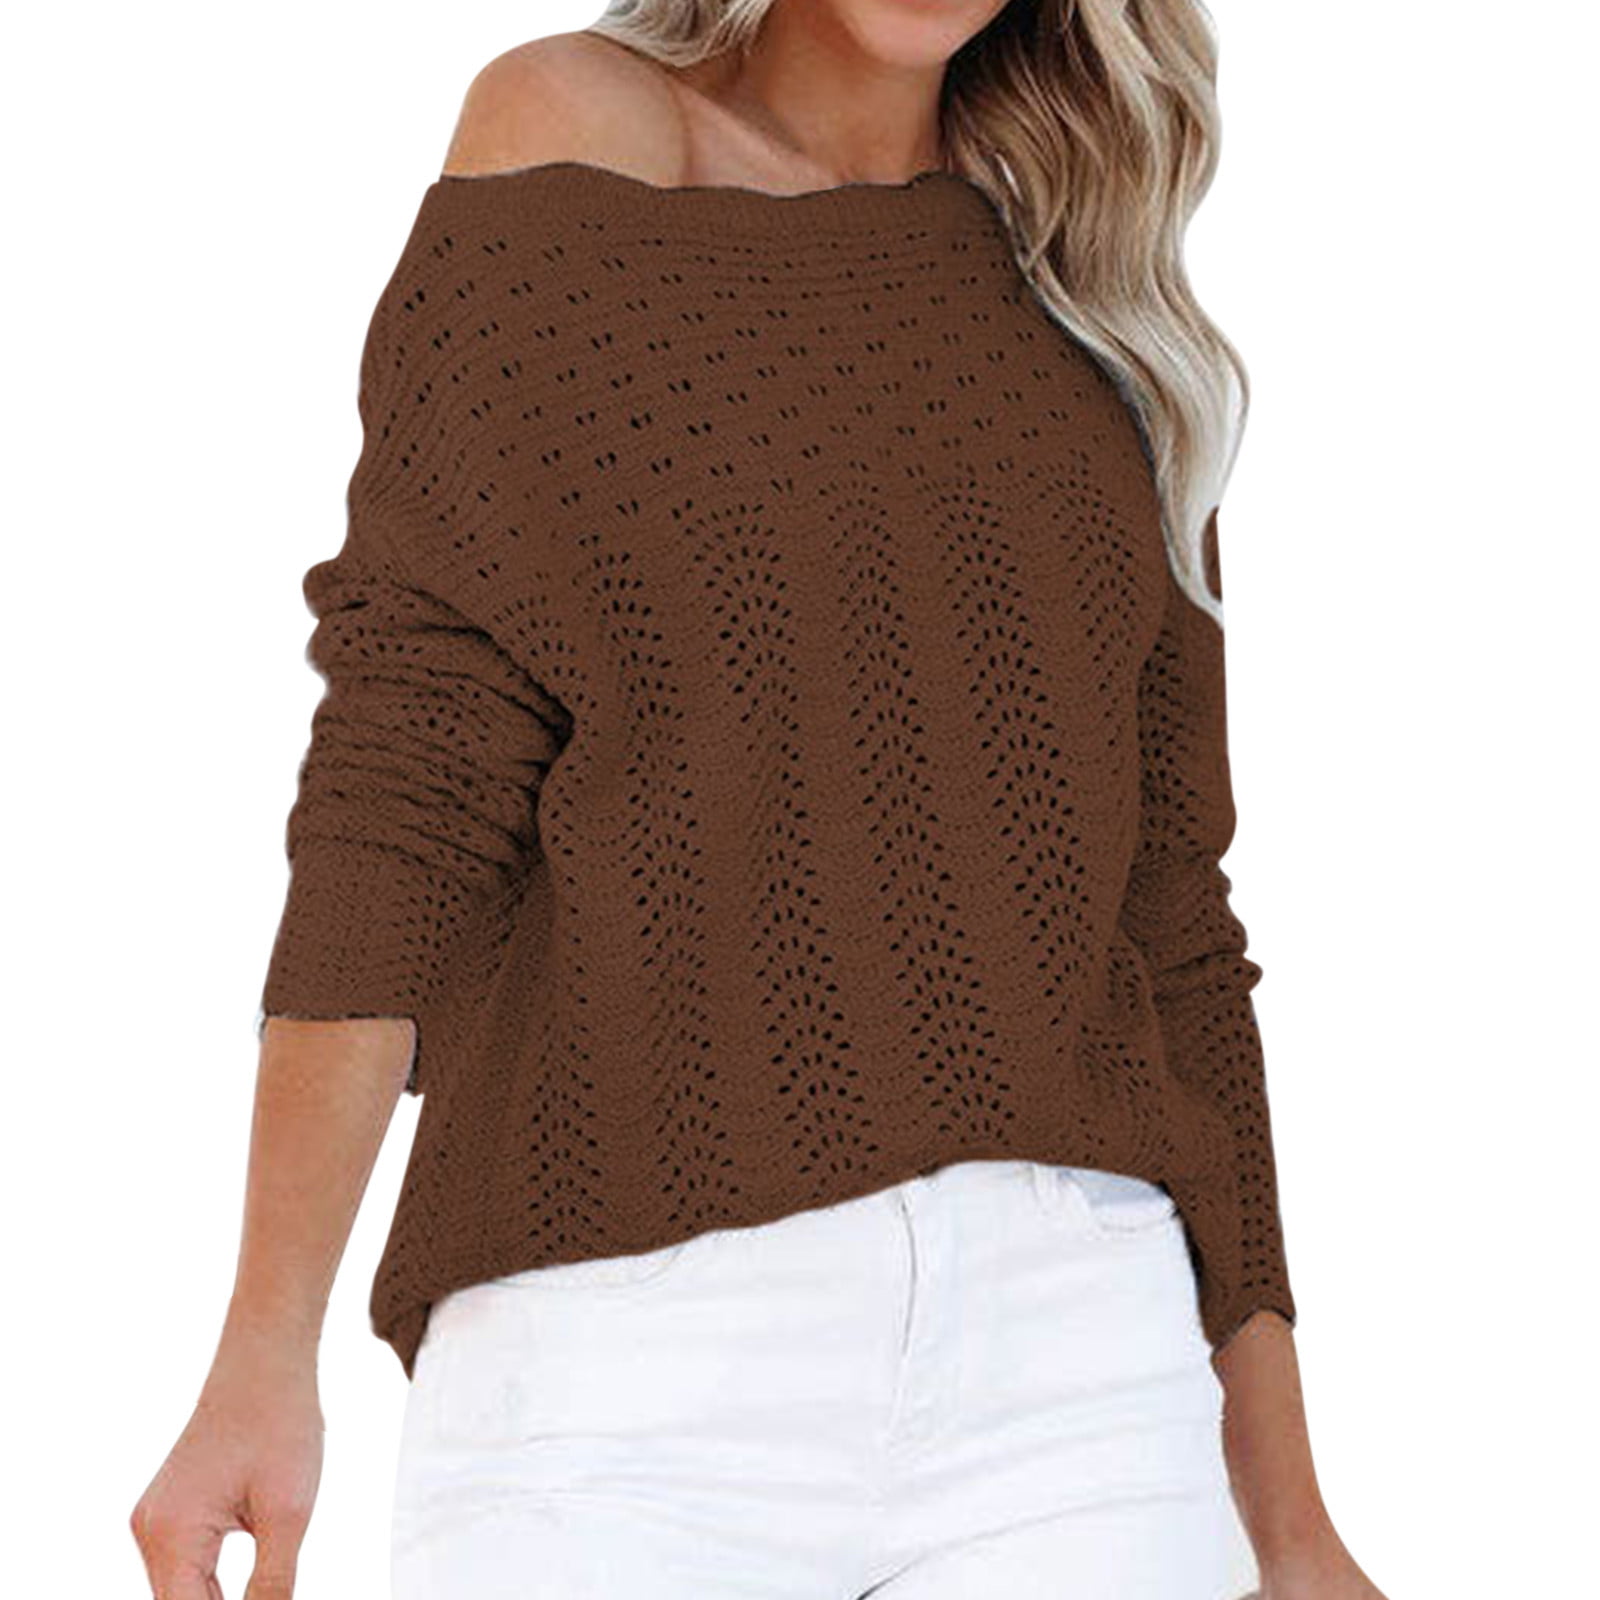 Modern Ocean Sweater Womens Off Shoulder Tops Sleeve Knit Shirt Pullover Jumper Tops Casual Warm Sweater Heart Outline Sweatshirt Zip up Sweaters Colla Sweaters for Men Winter Clothes Men -